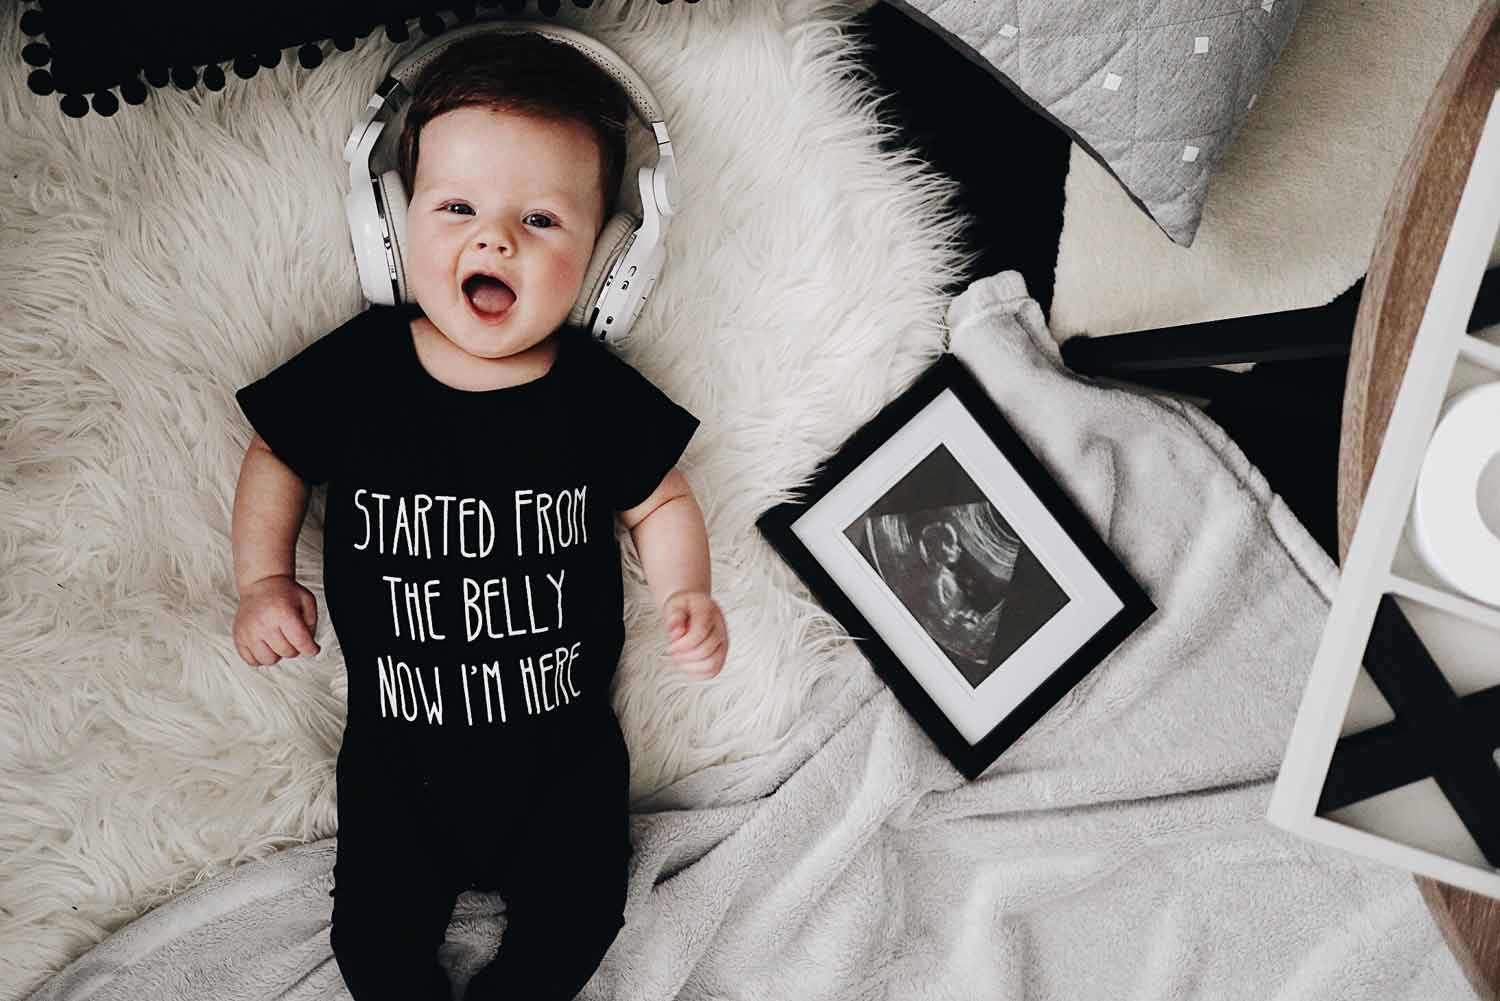 5 Tips for Creating Whimsical Instagram Pictures with a Baby